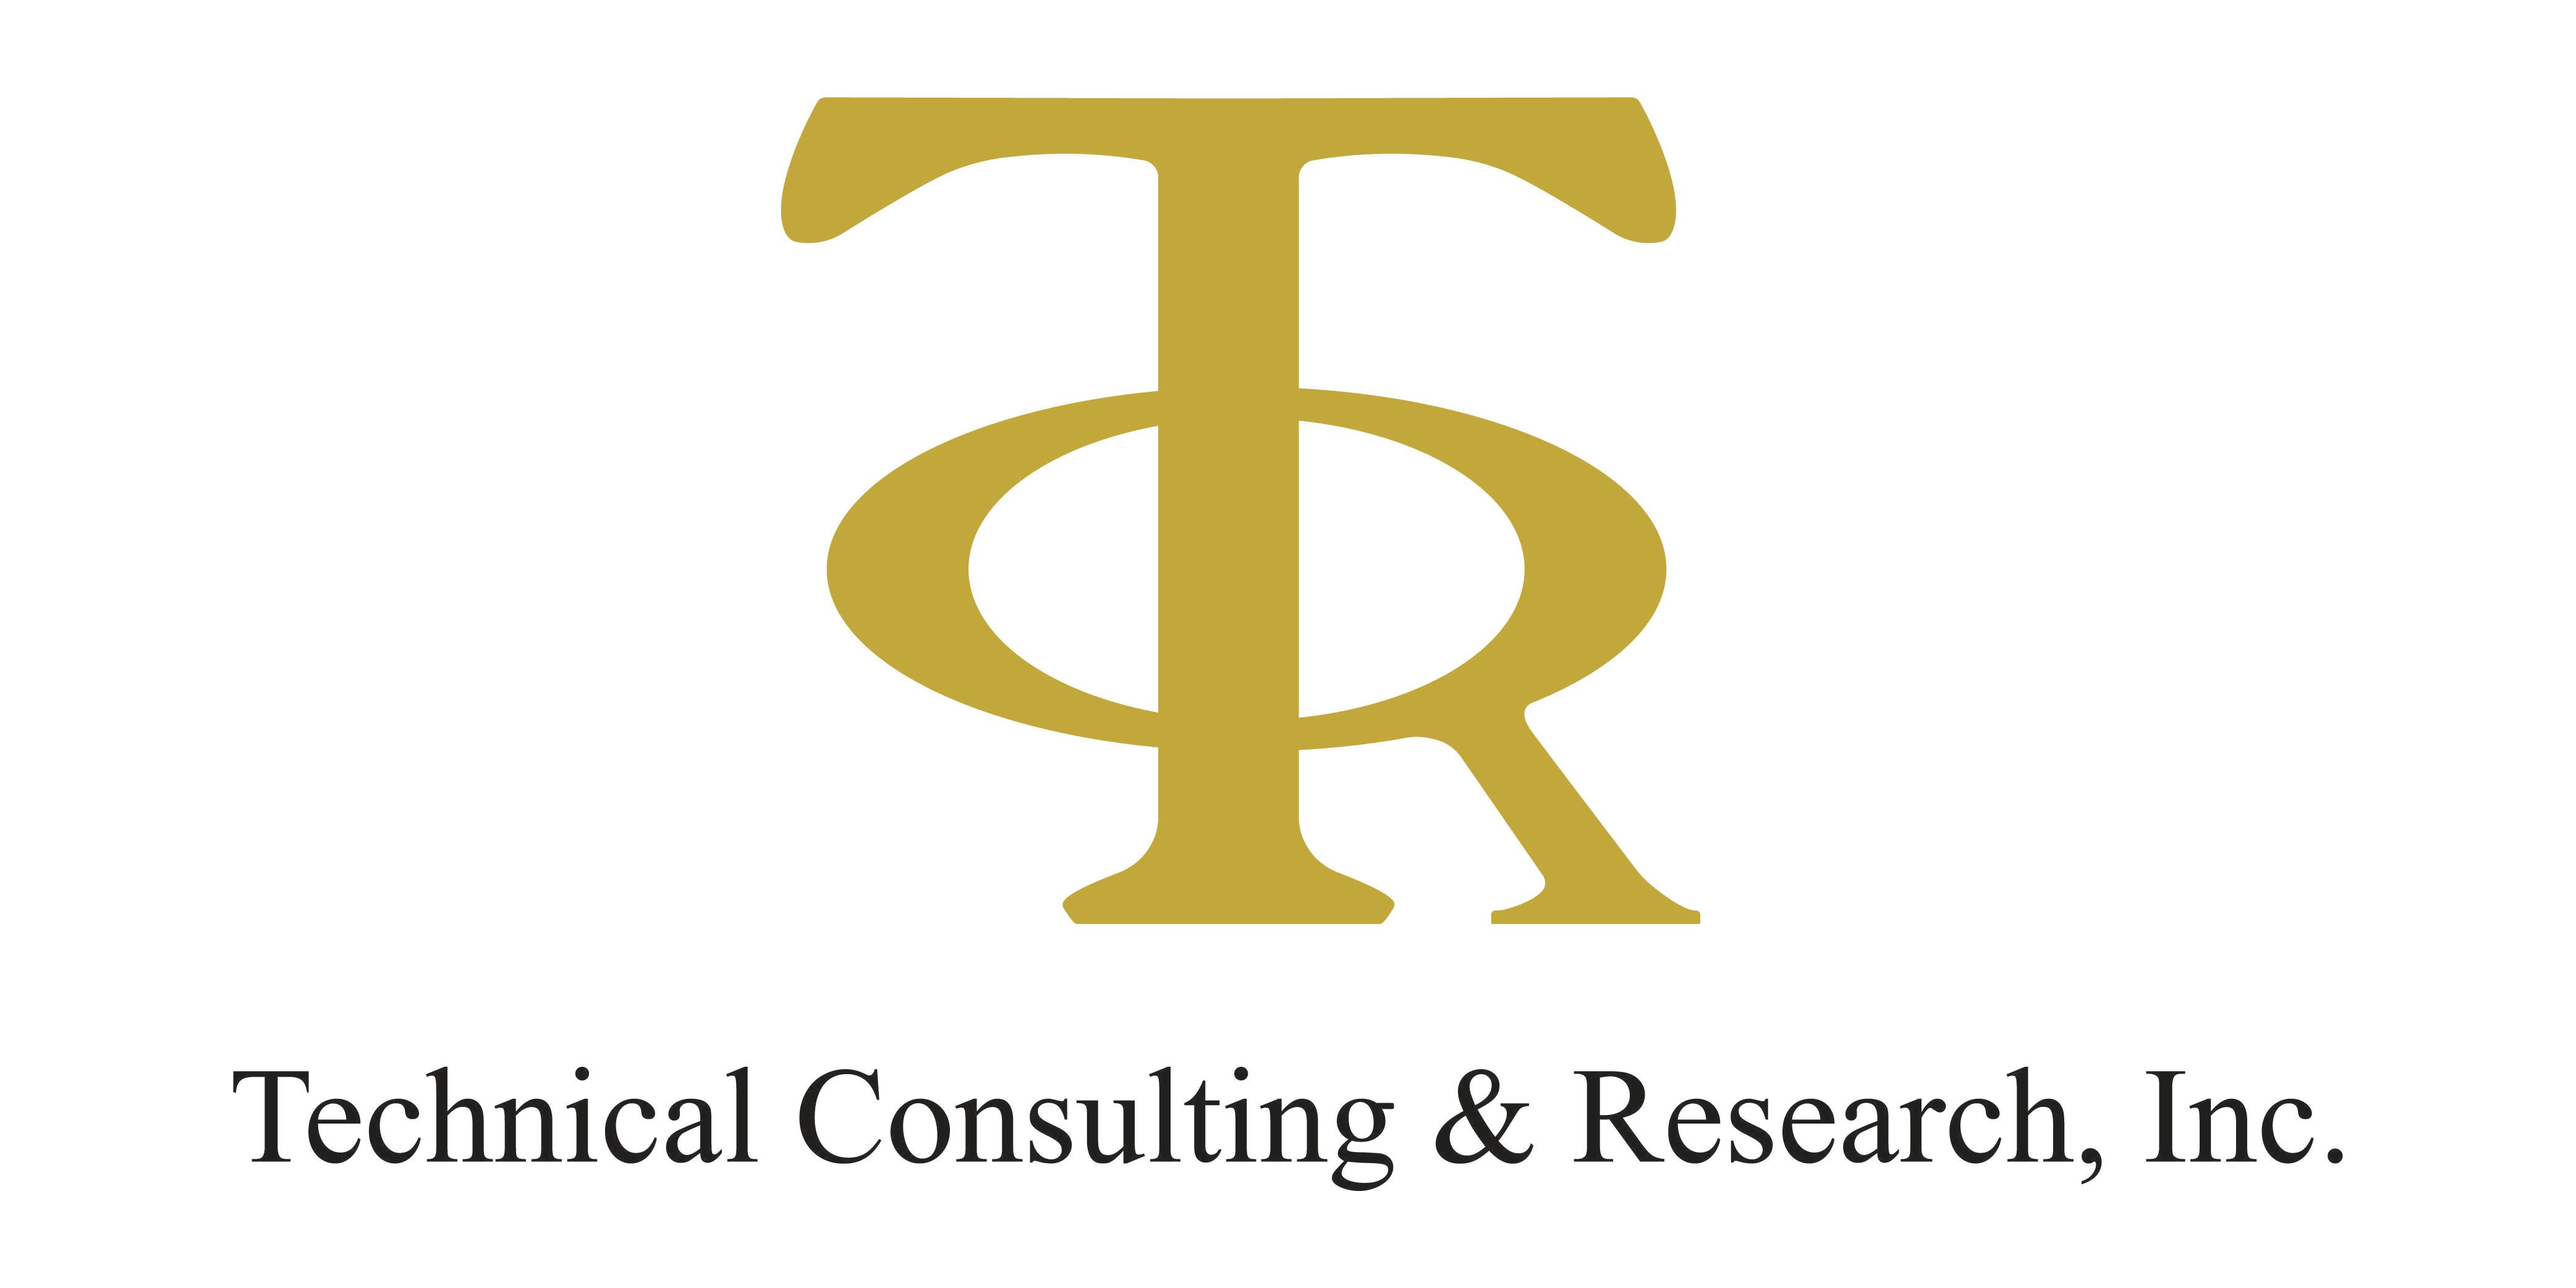 TCR Logo - Technical Consulting and Research, Inc